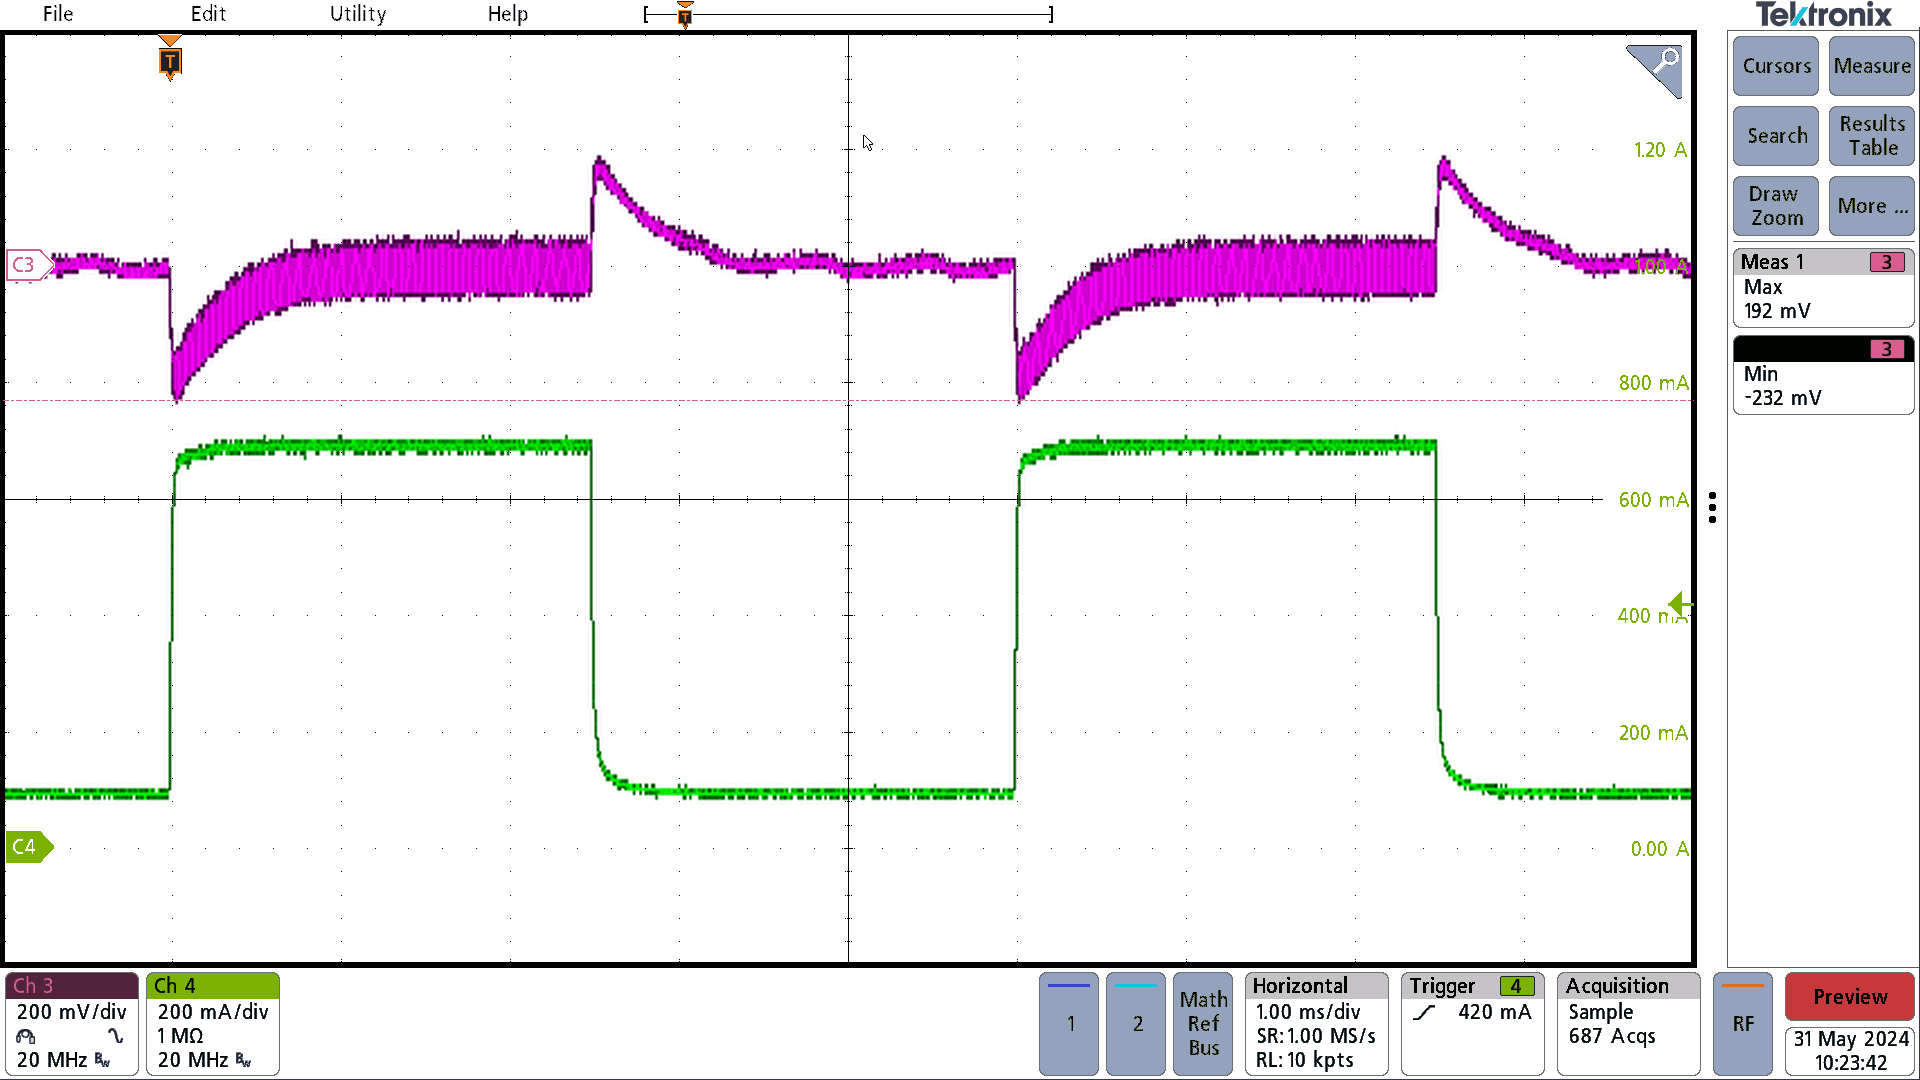 PMP23470 Load Transient Response With
                    ISOM8110